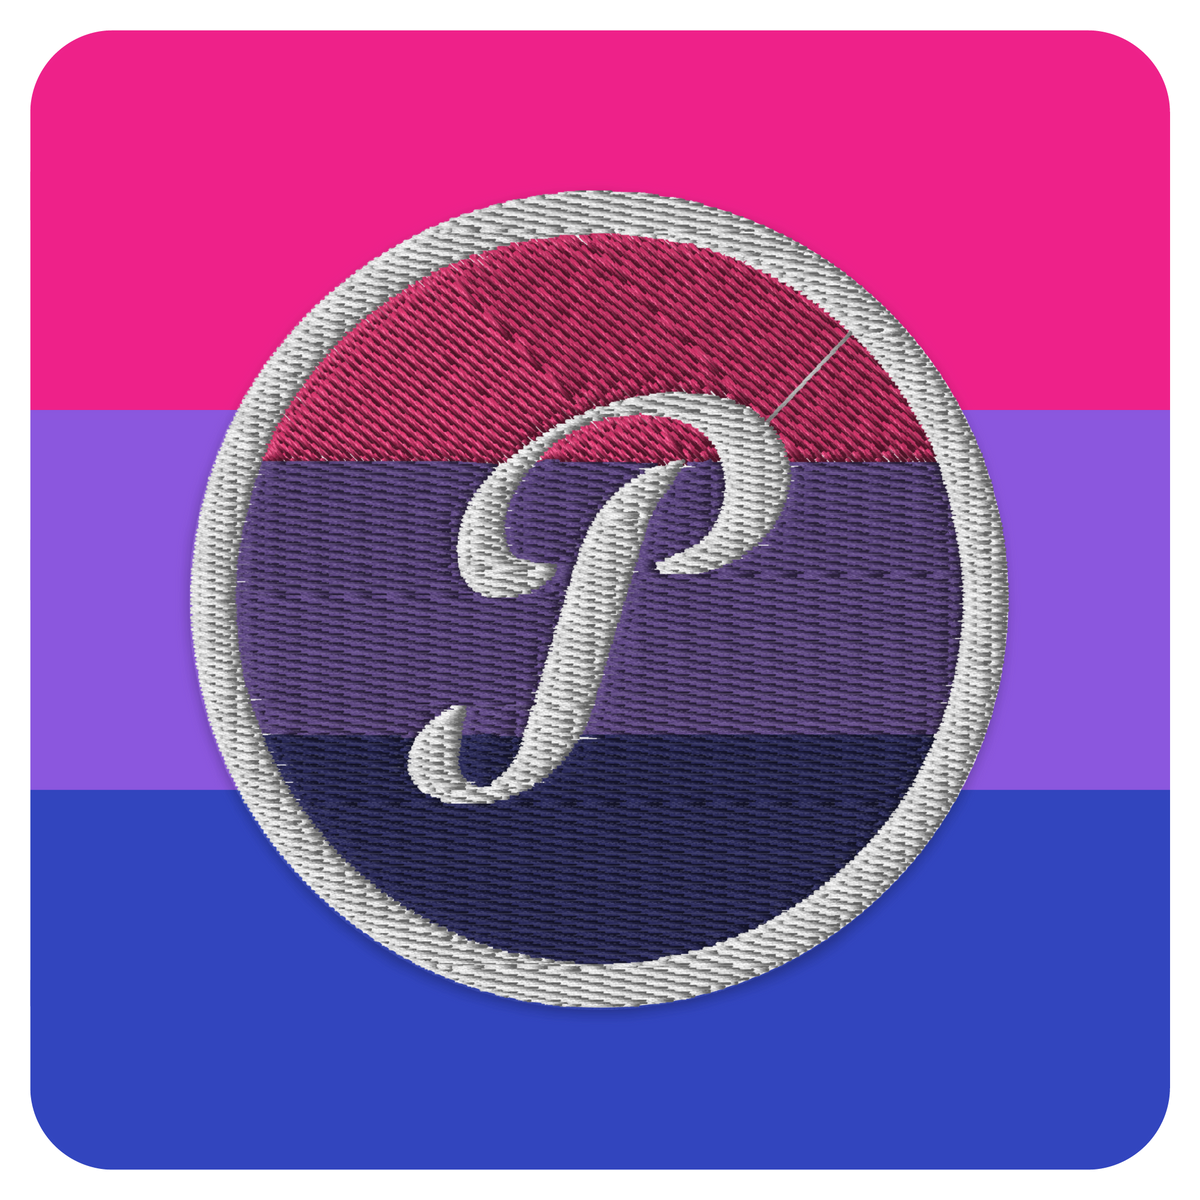 BISEXUAL PRIDE PATCH